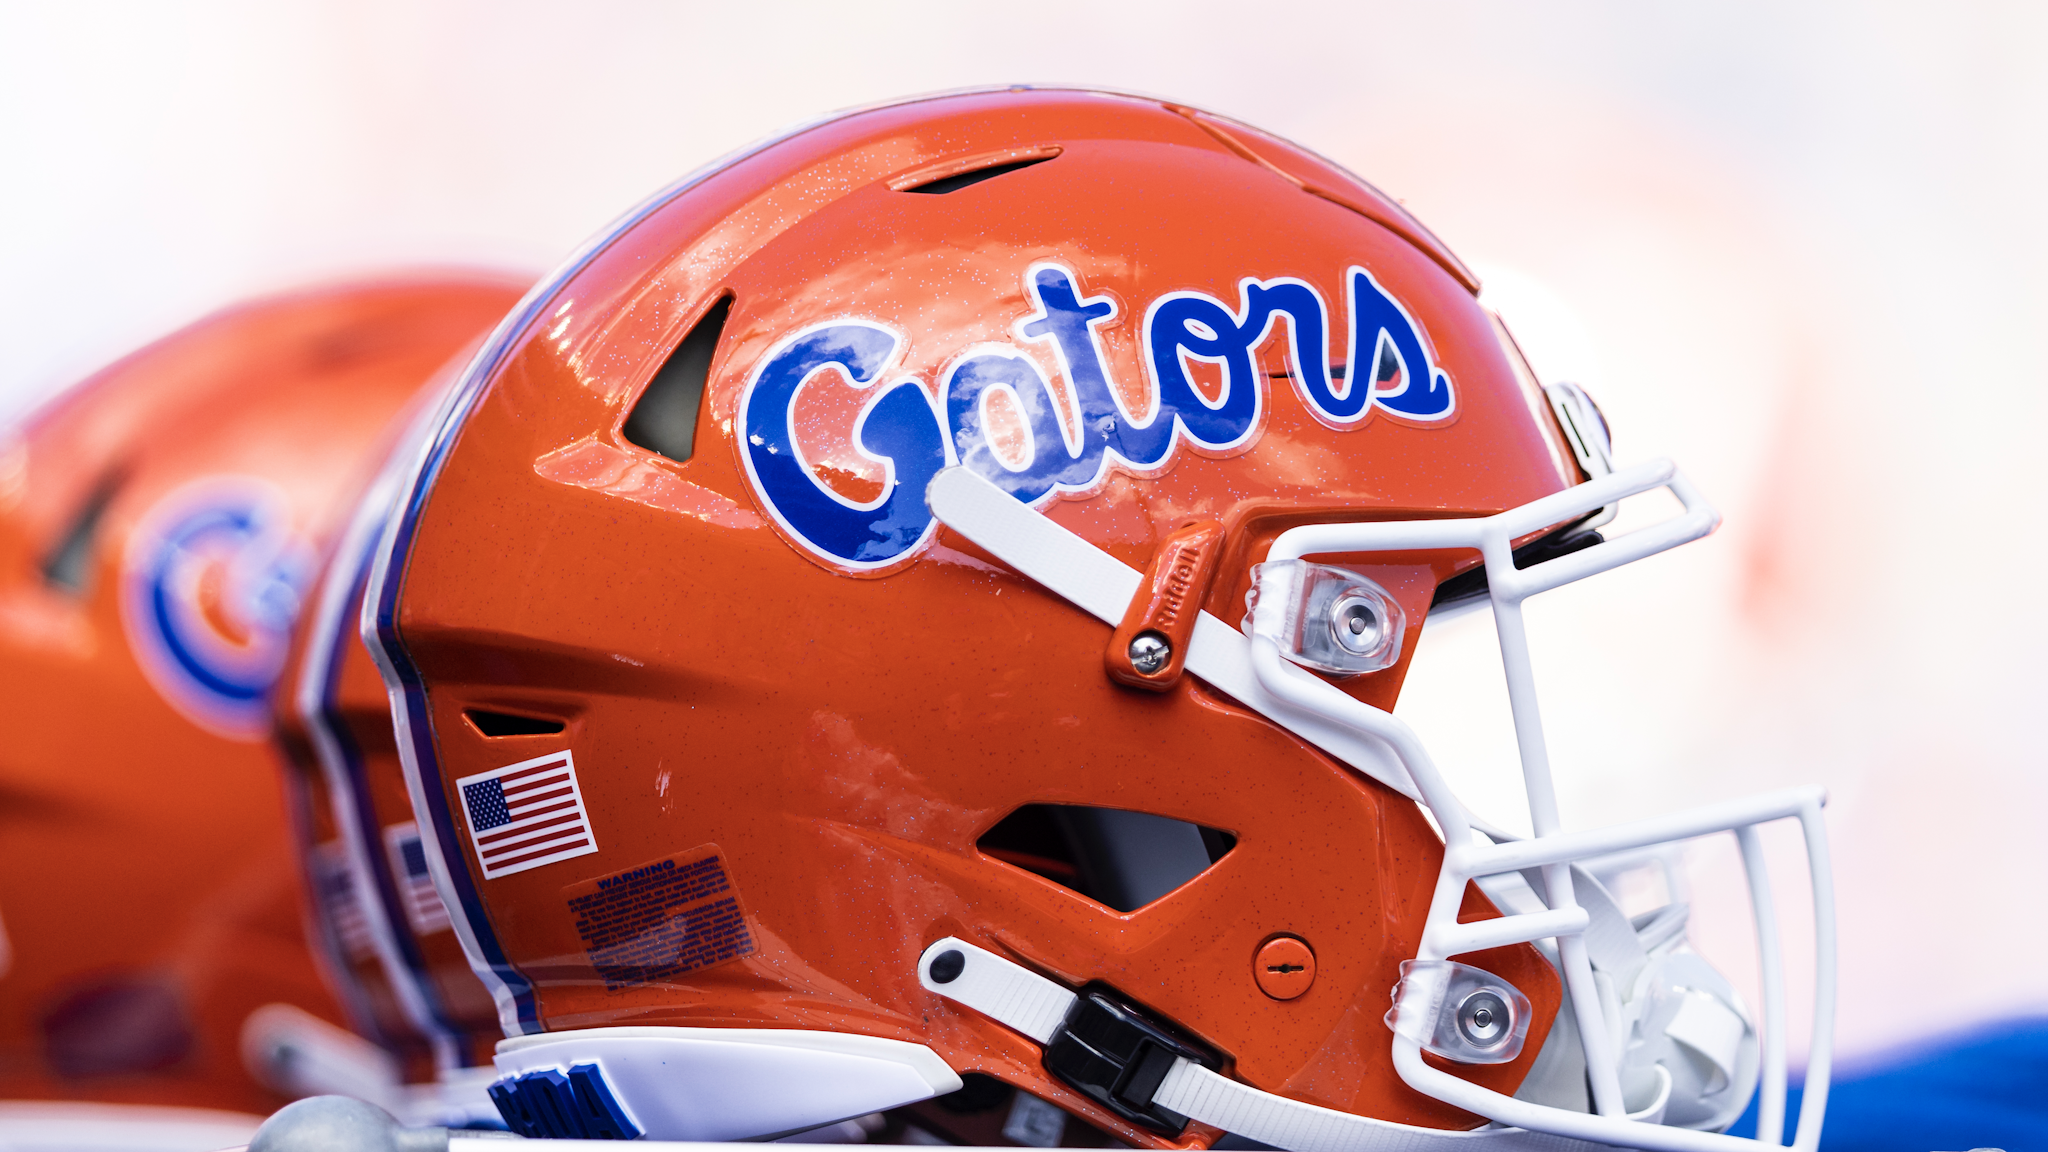 GAINESVILLE, FLORIDA - NOVEMBER 13: A Florida Gators helmet is seen on the sideline during the third quarter of a game between the Florida Gators and the Samford Bulldogs at Ben Hill Griffin Stadium on November 13, 2021 in Gainesville, Florida.